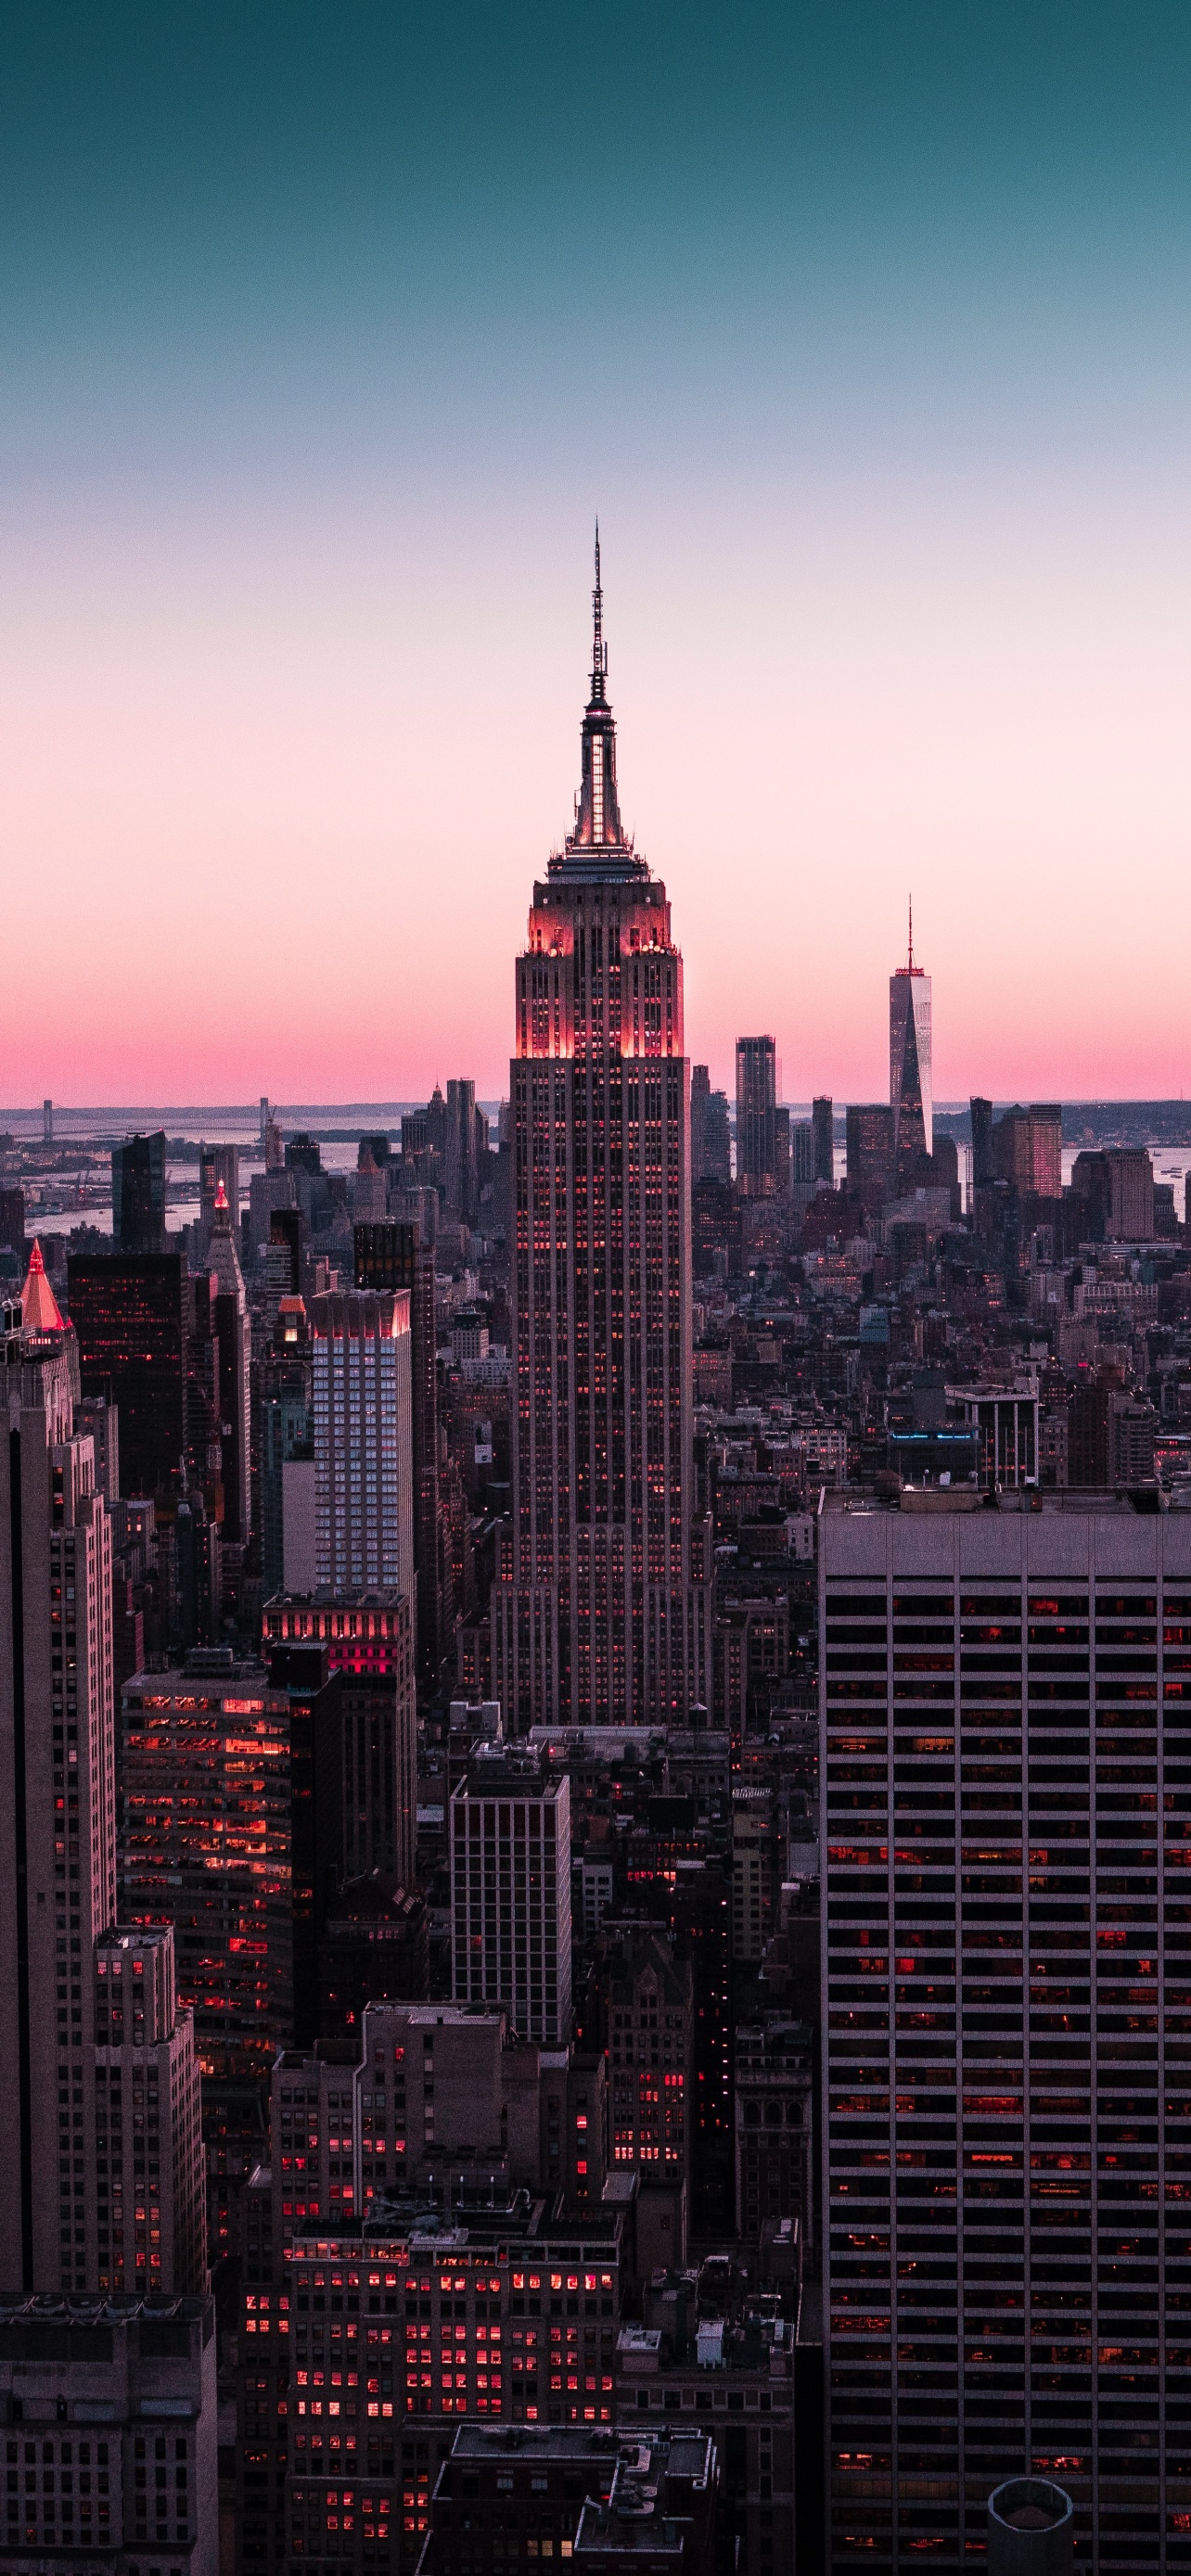 Download wallpaper 1125x2436 buildings skyscrapers city new york iphone  x 1125x2436 hd background 695